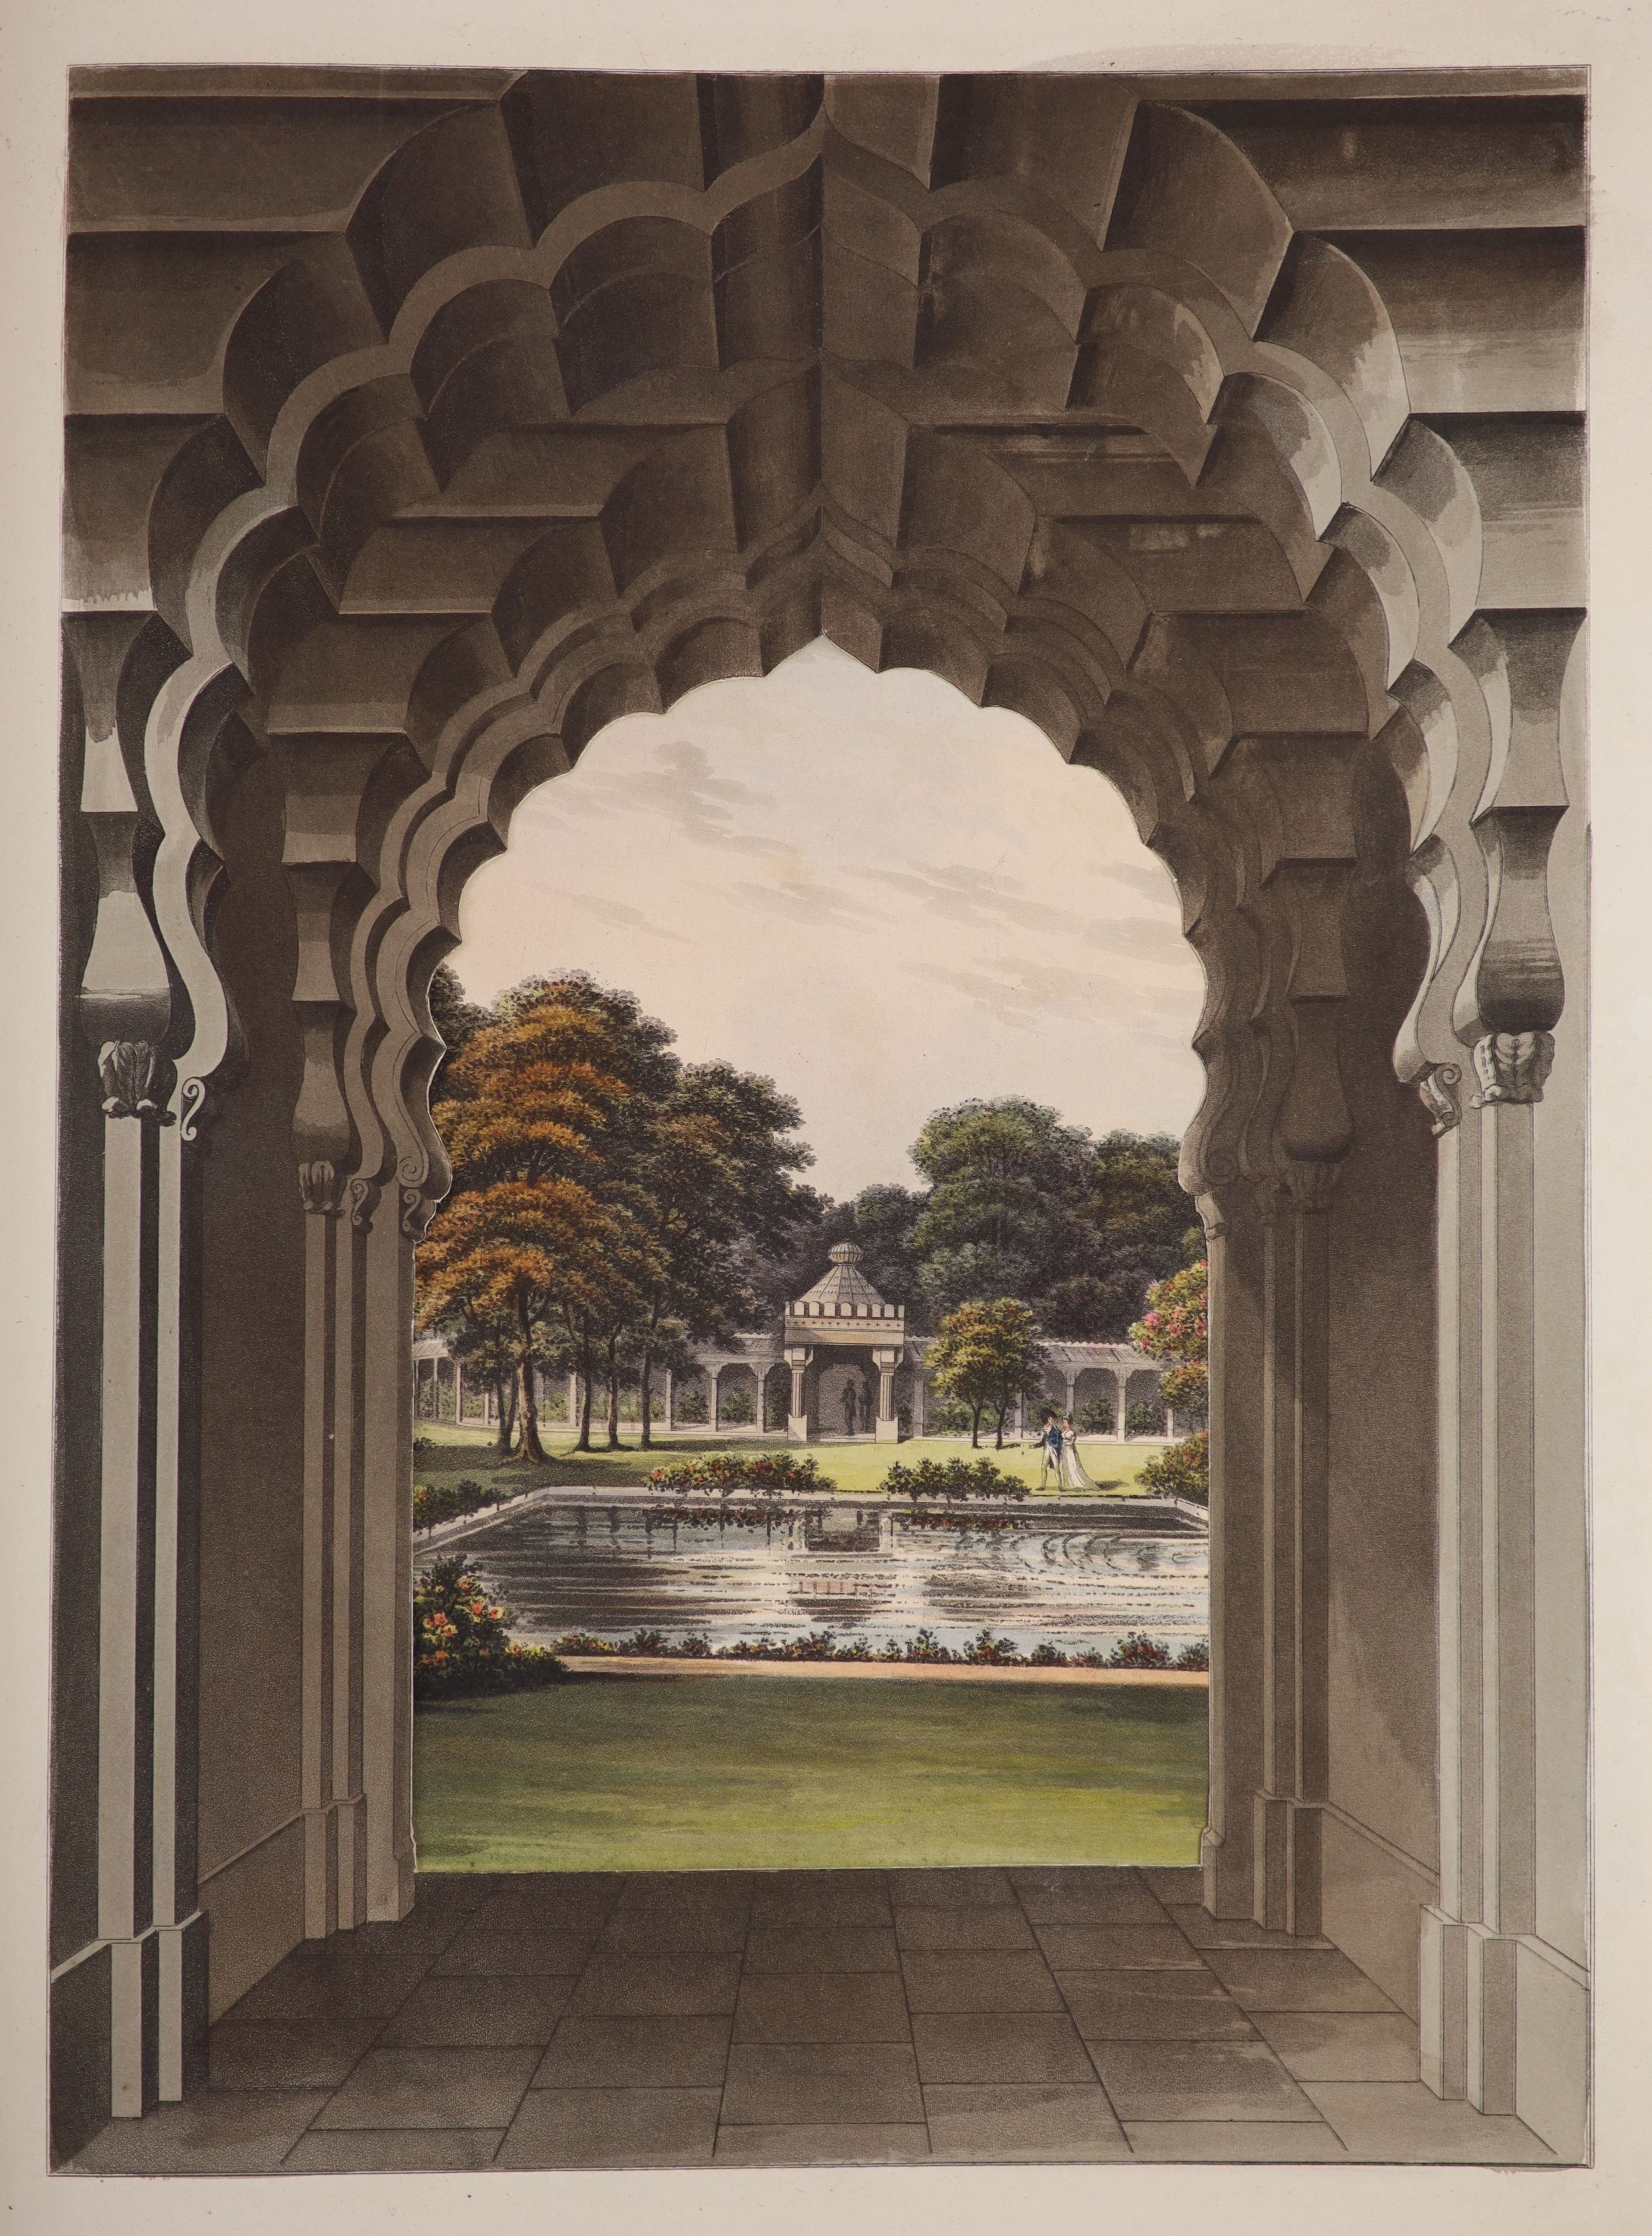 Repton, Humphry; John Aden & G.S - Design for the Pavillon [sic] at Brighton, 2nd issue, folio, rebound half blue morocco, with 20 plates and illustrations, including an engraved hand-coloured general ground plan; compri